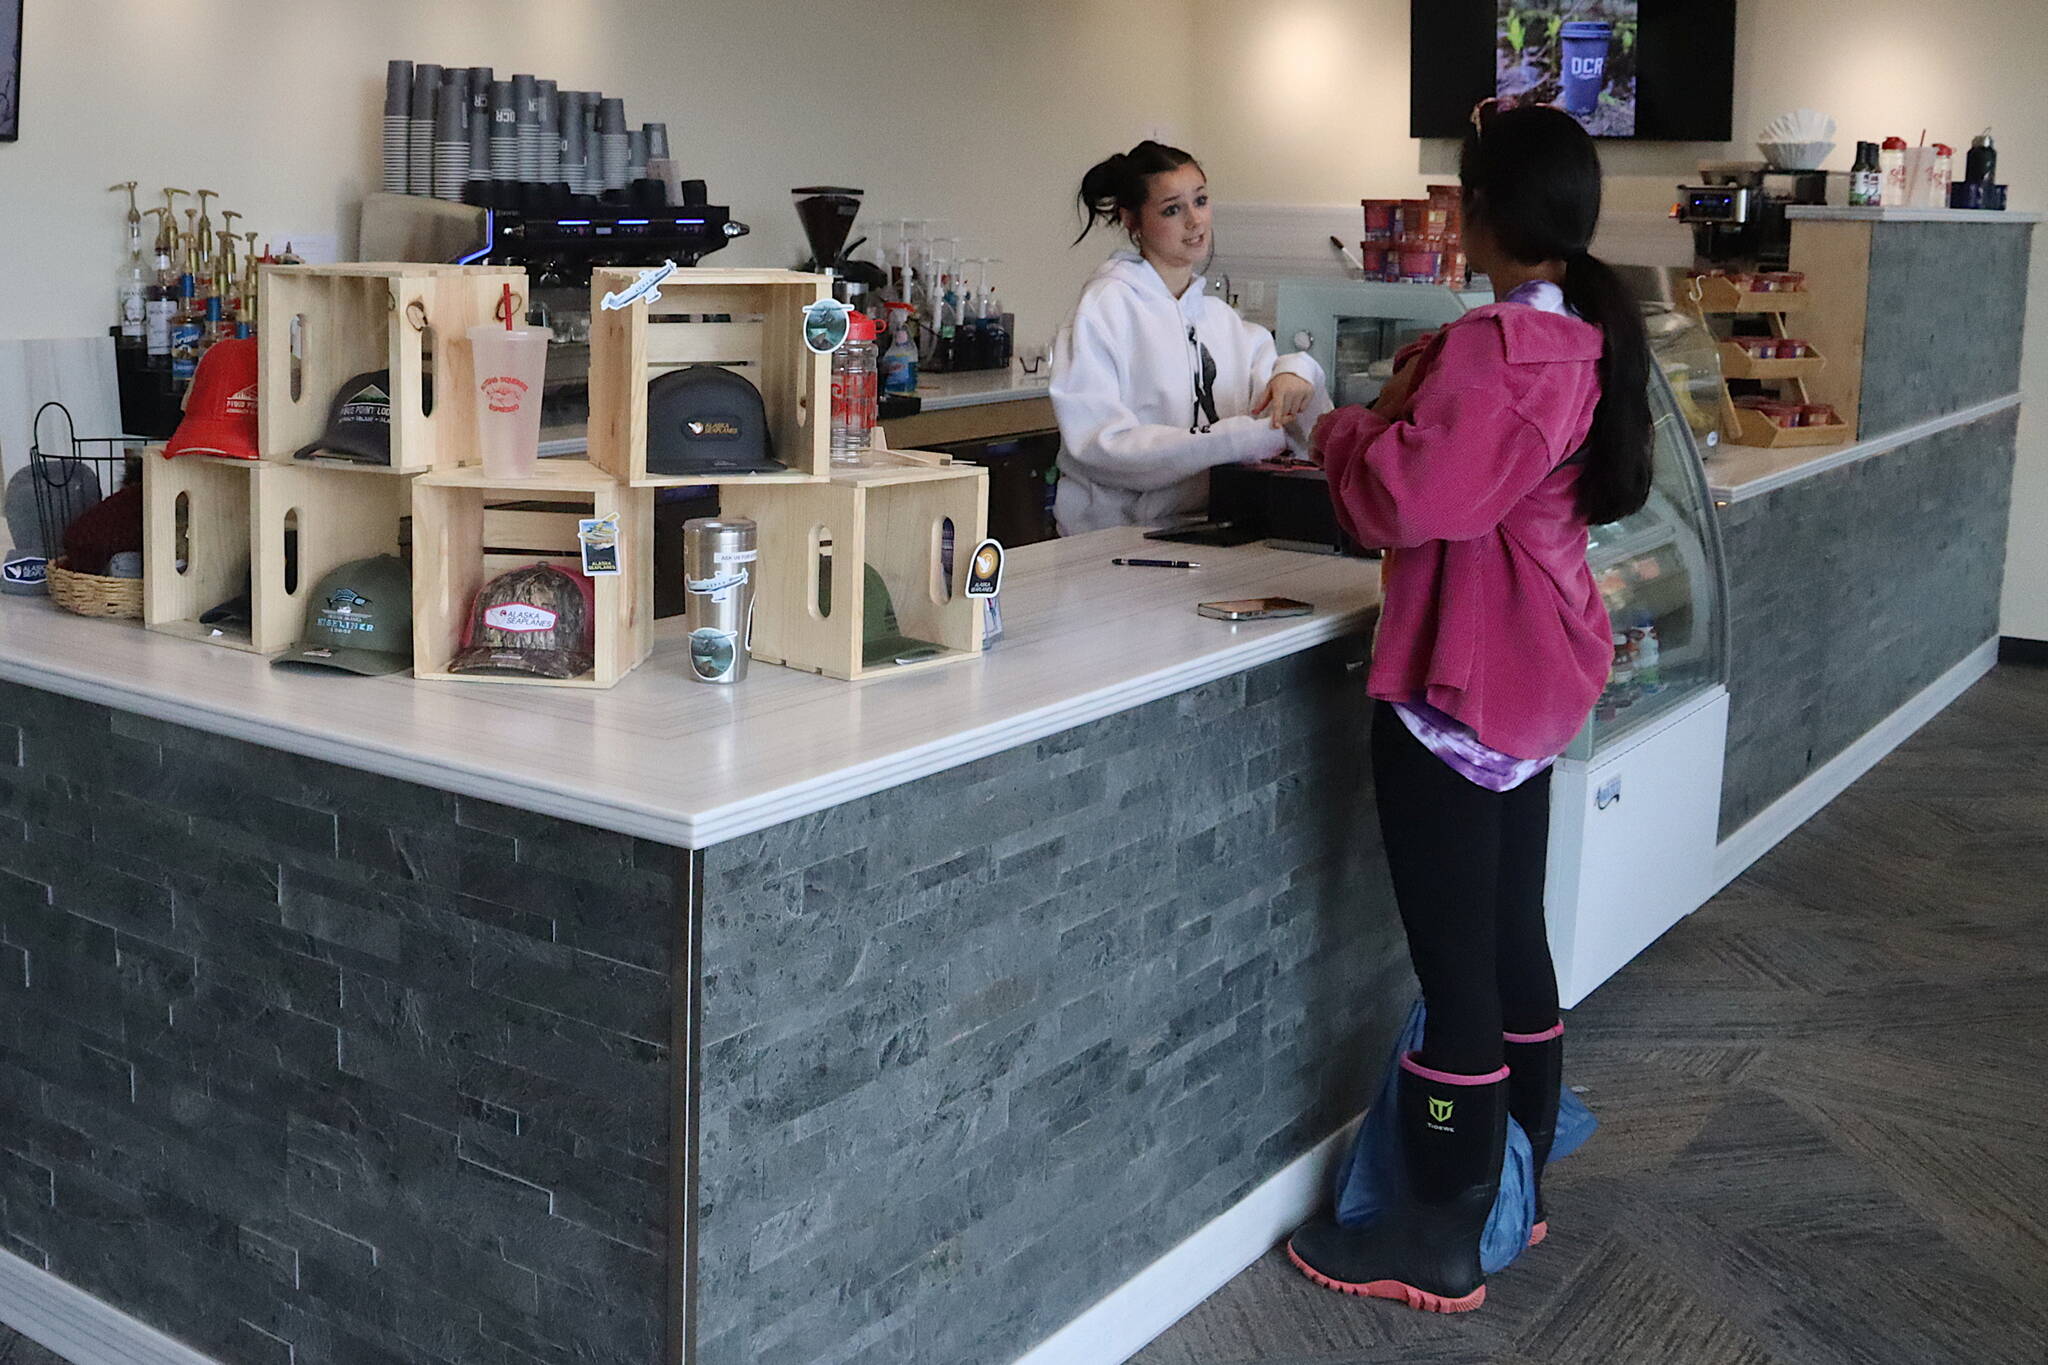 Disney Williams (right) orders coffee from Lorelai Bingham from the Flying Squirrel coffee stand at Juneau International Airport on Thursday. (Mark Sabbatini / Juneau Empire)